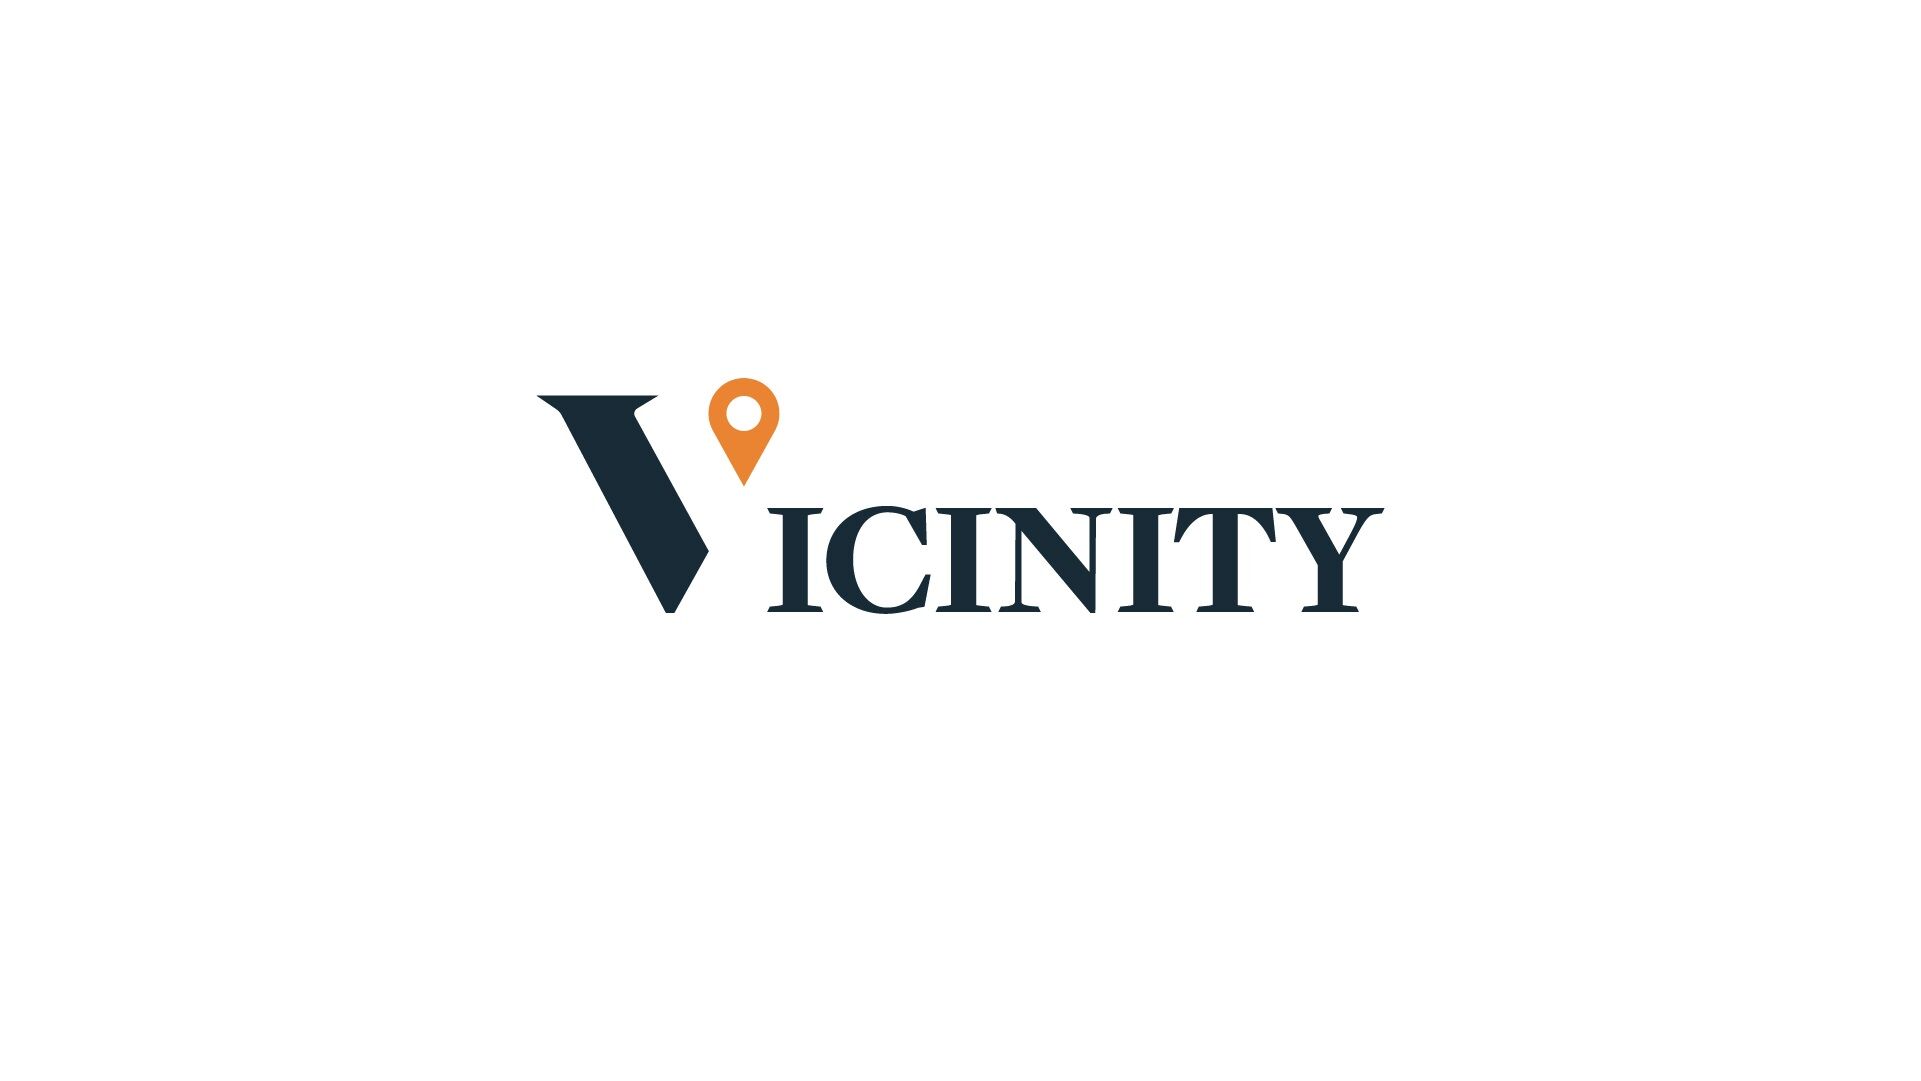 Vicinity logo in black lettering with a part of the 'V' as an orange pin drop.